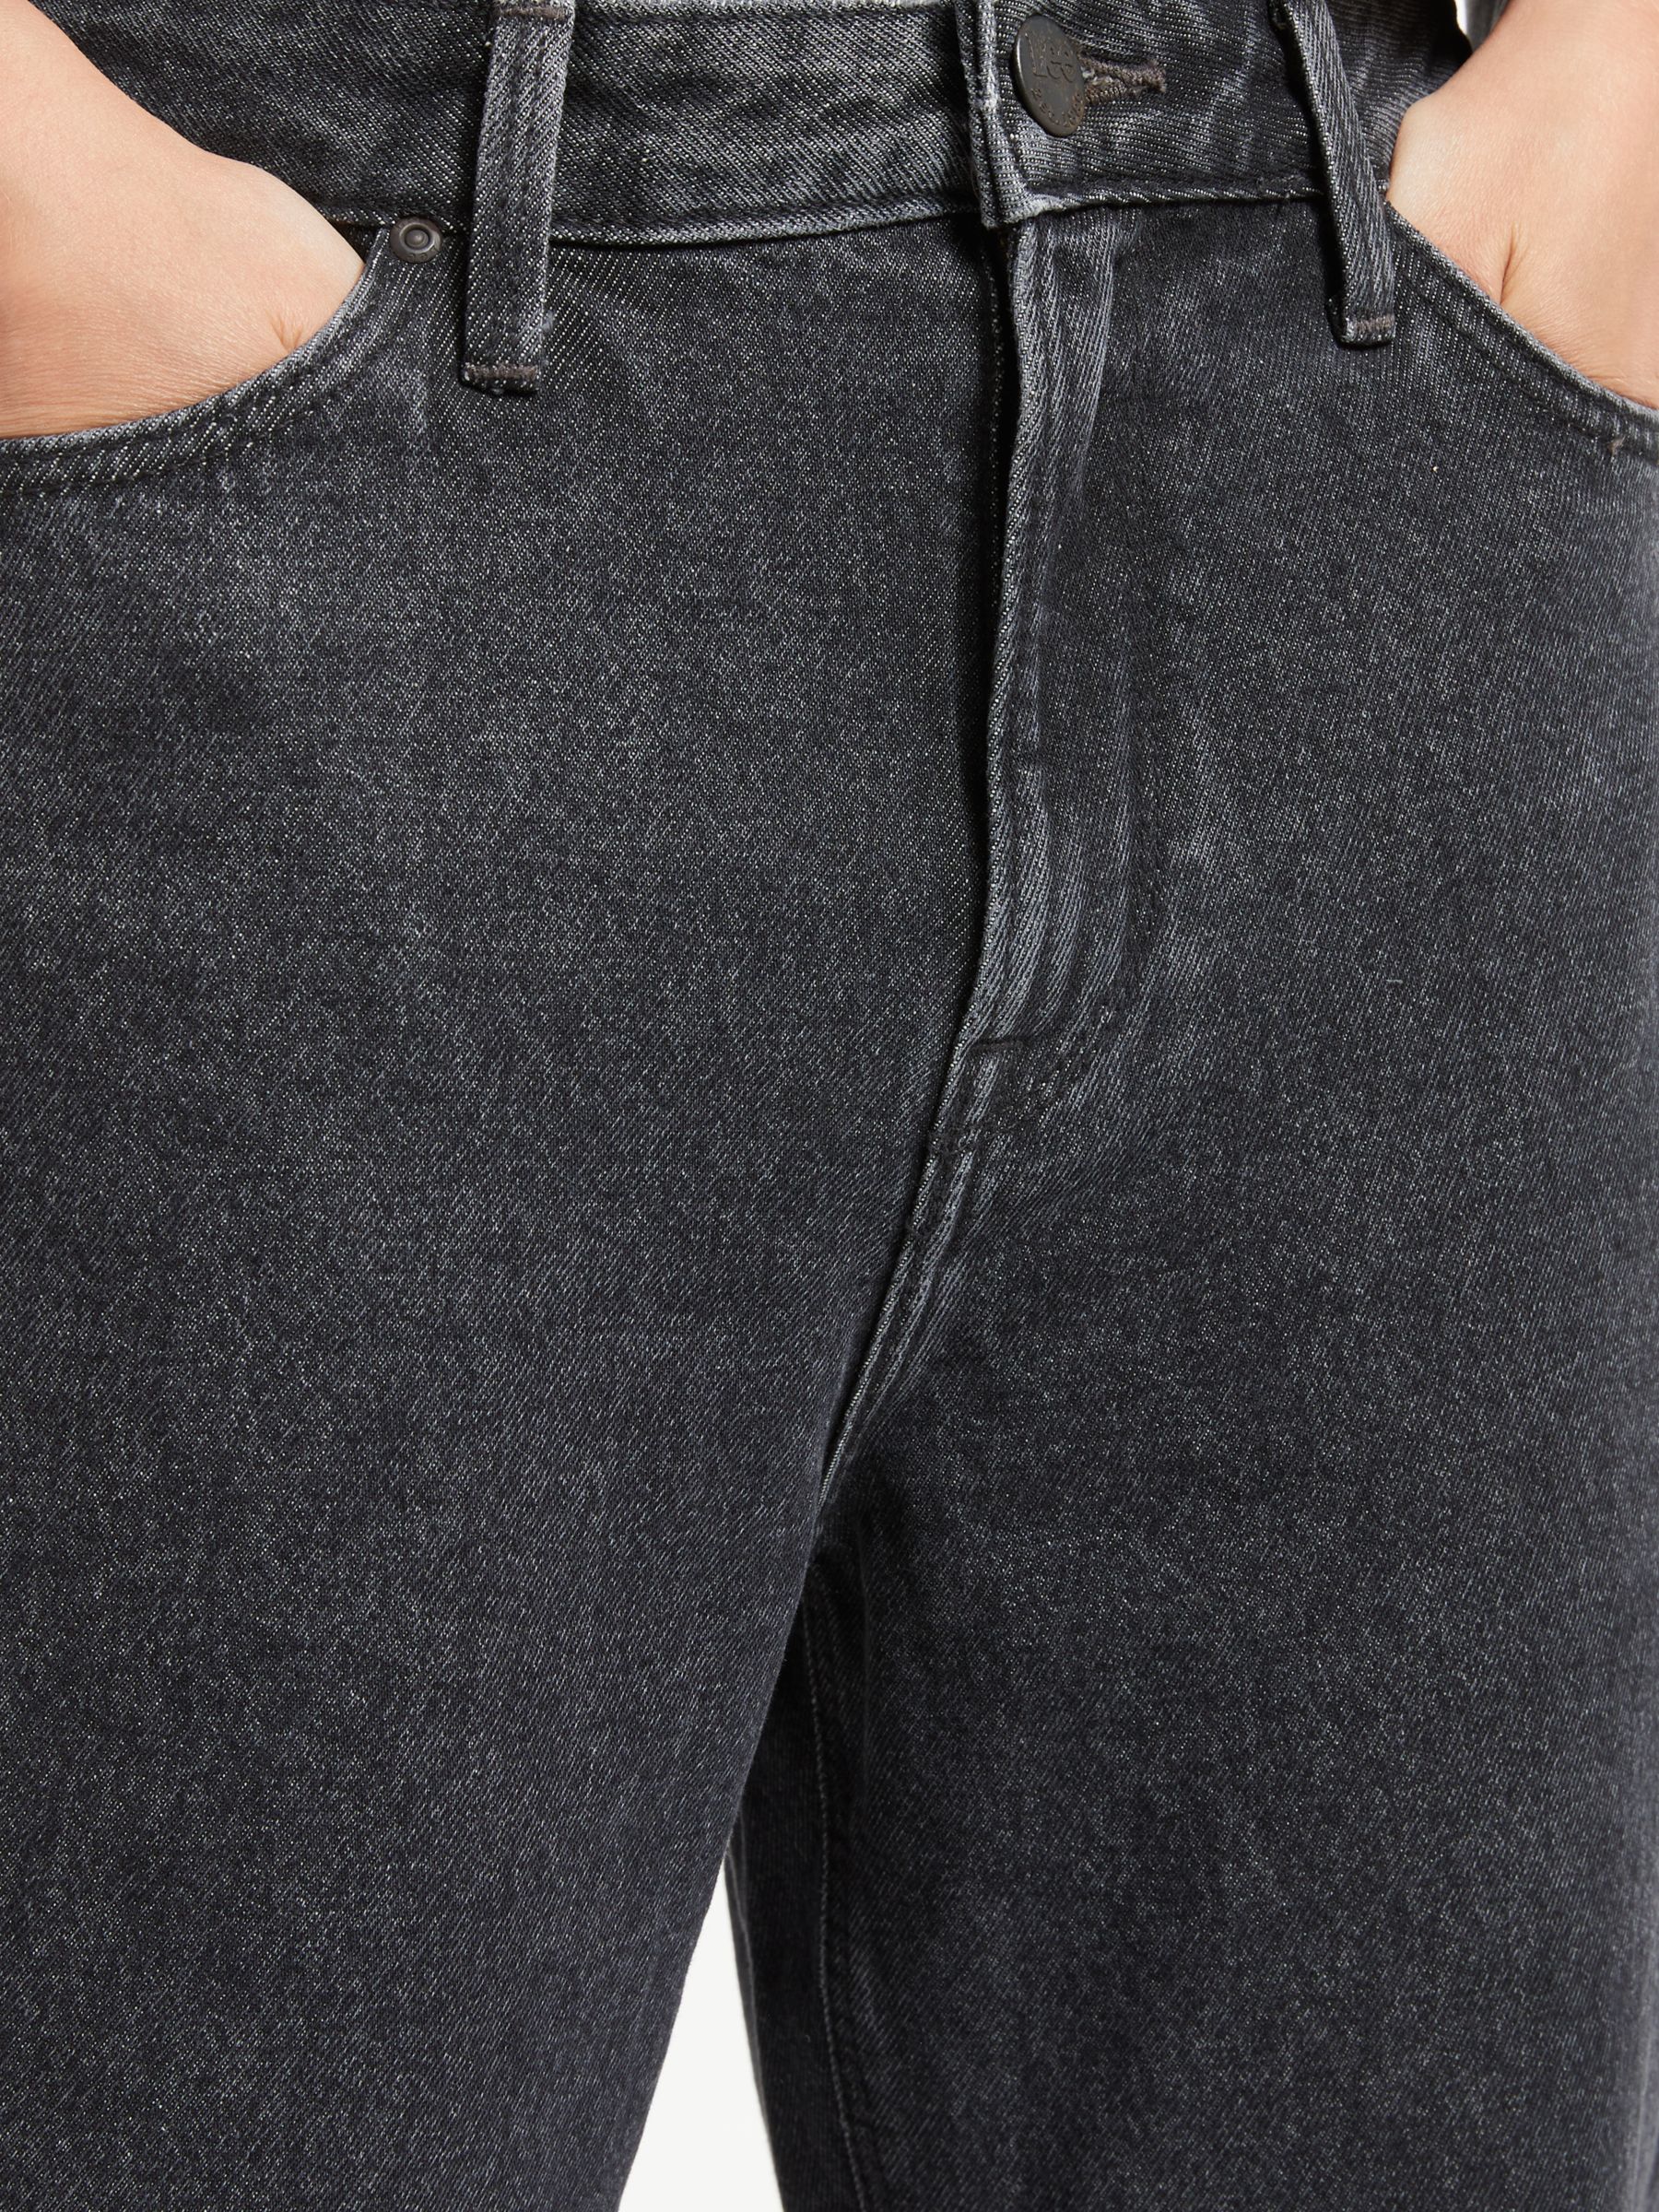 Lee Mom Straight Relaxed Leg Jeans, Black Stone, W29/L31